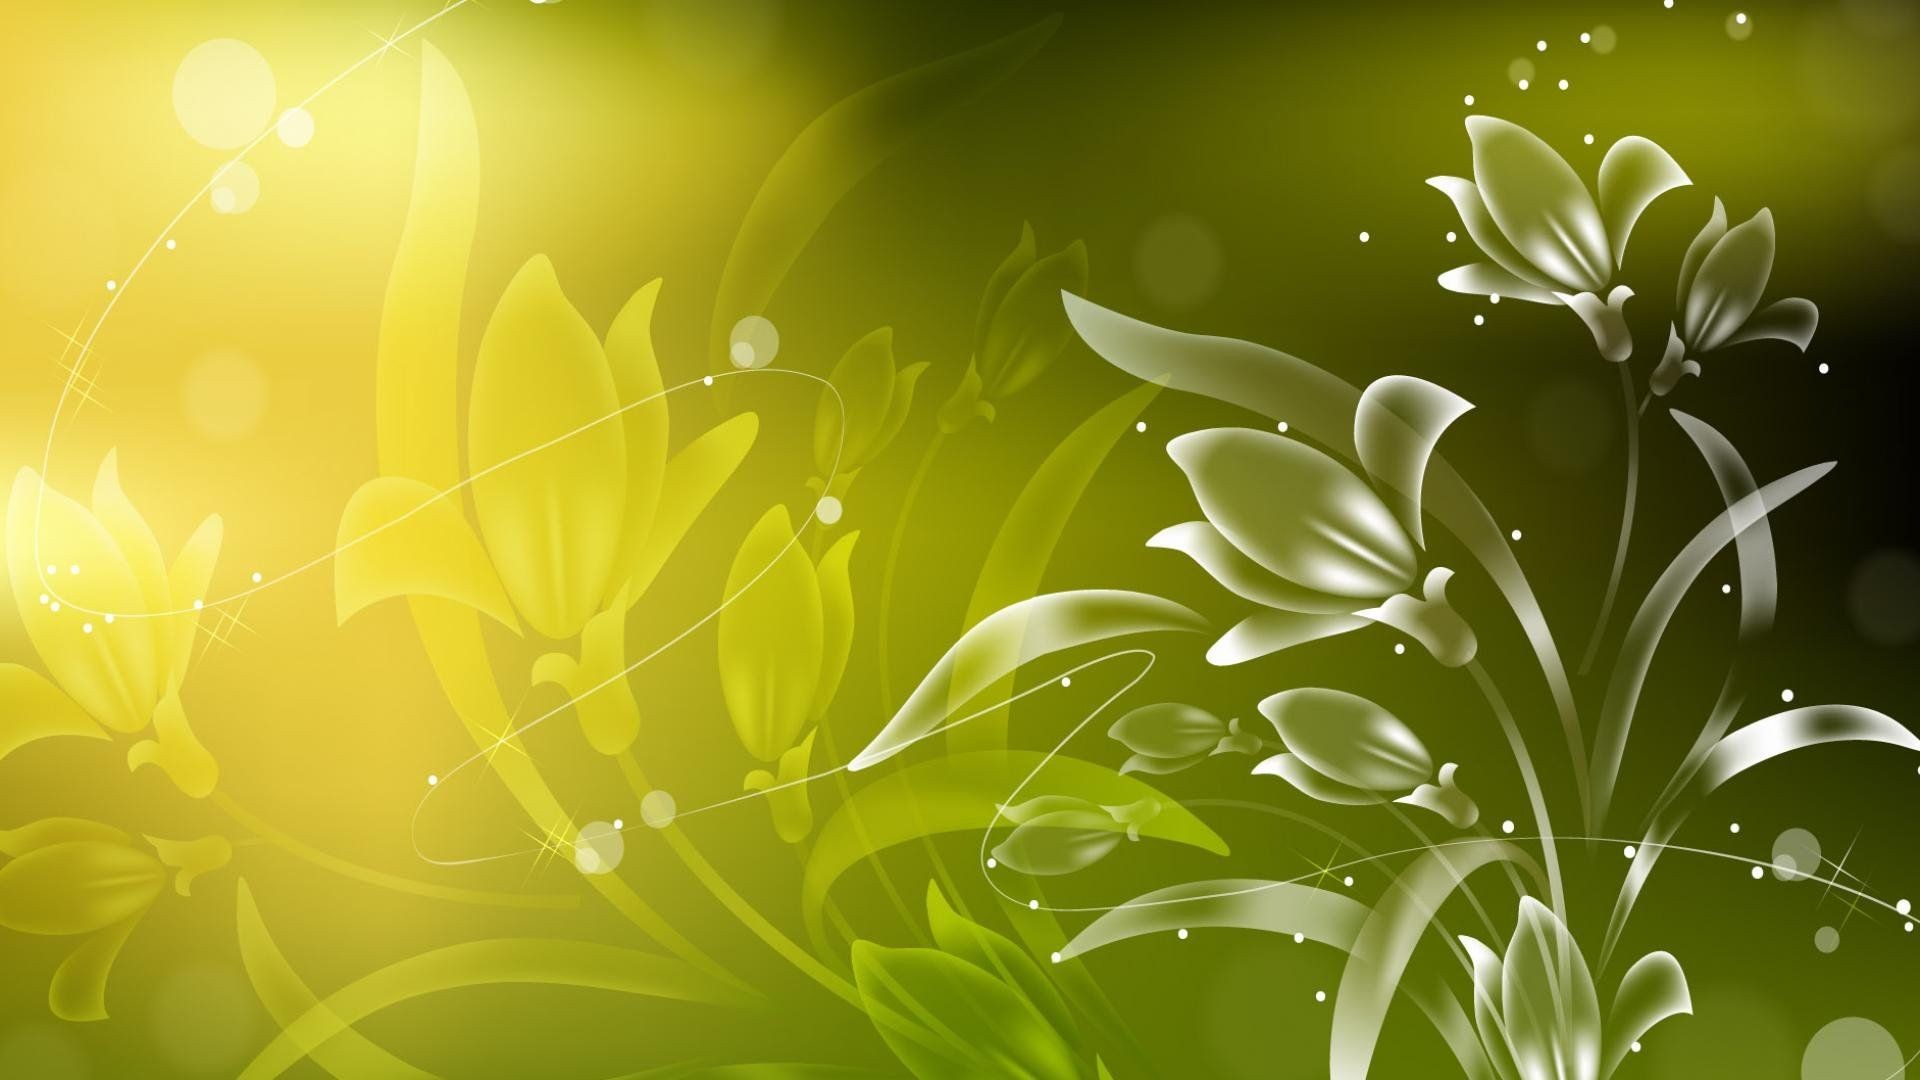 Abstract Leaves hd background